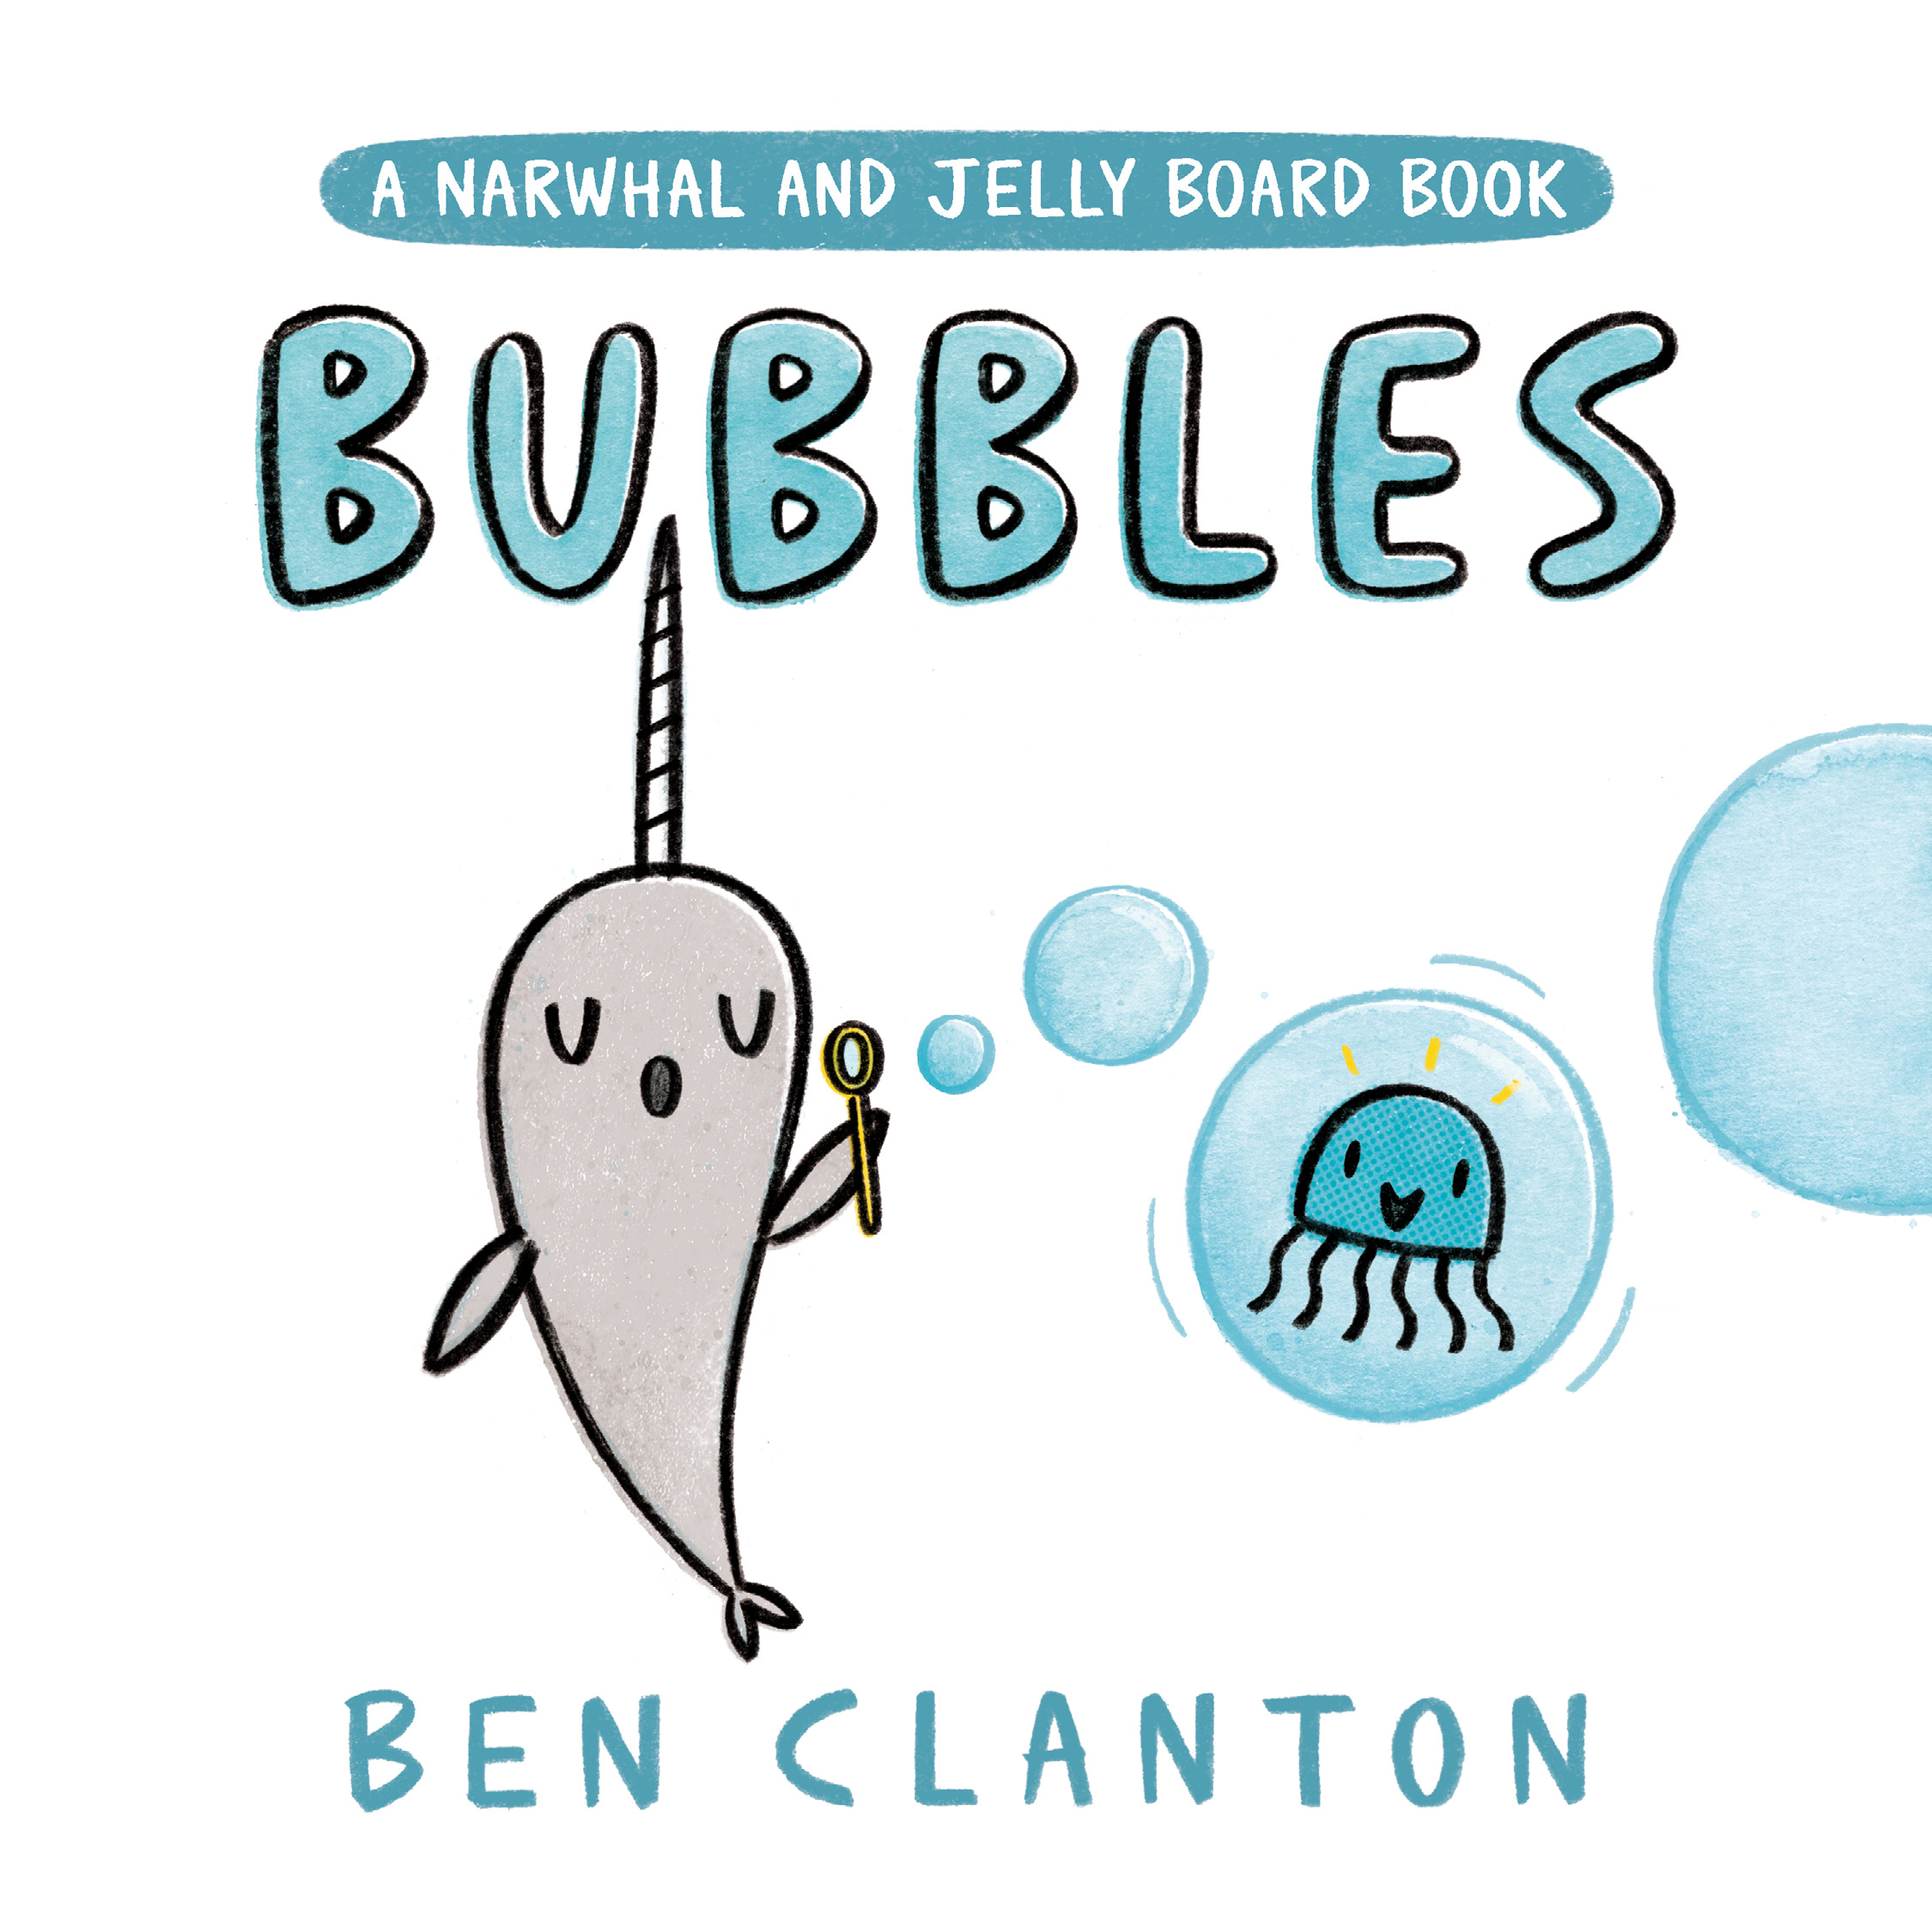 Bubbles (A Narwhal and Jelly Board Book) | Clanton, Ben (Auteur)